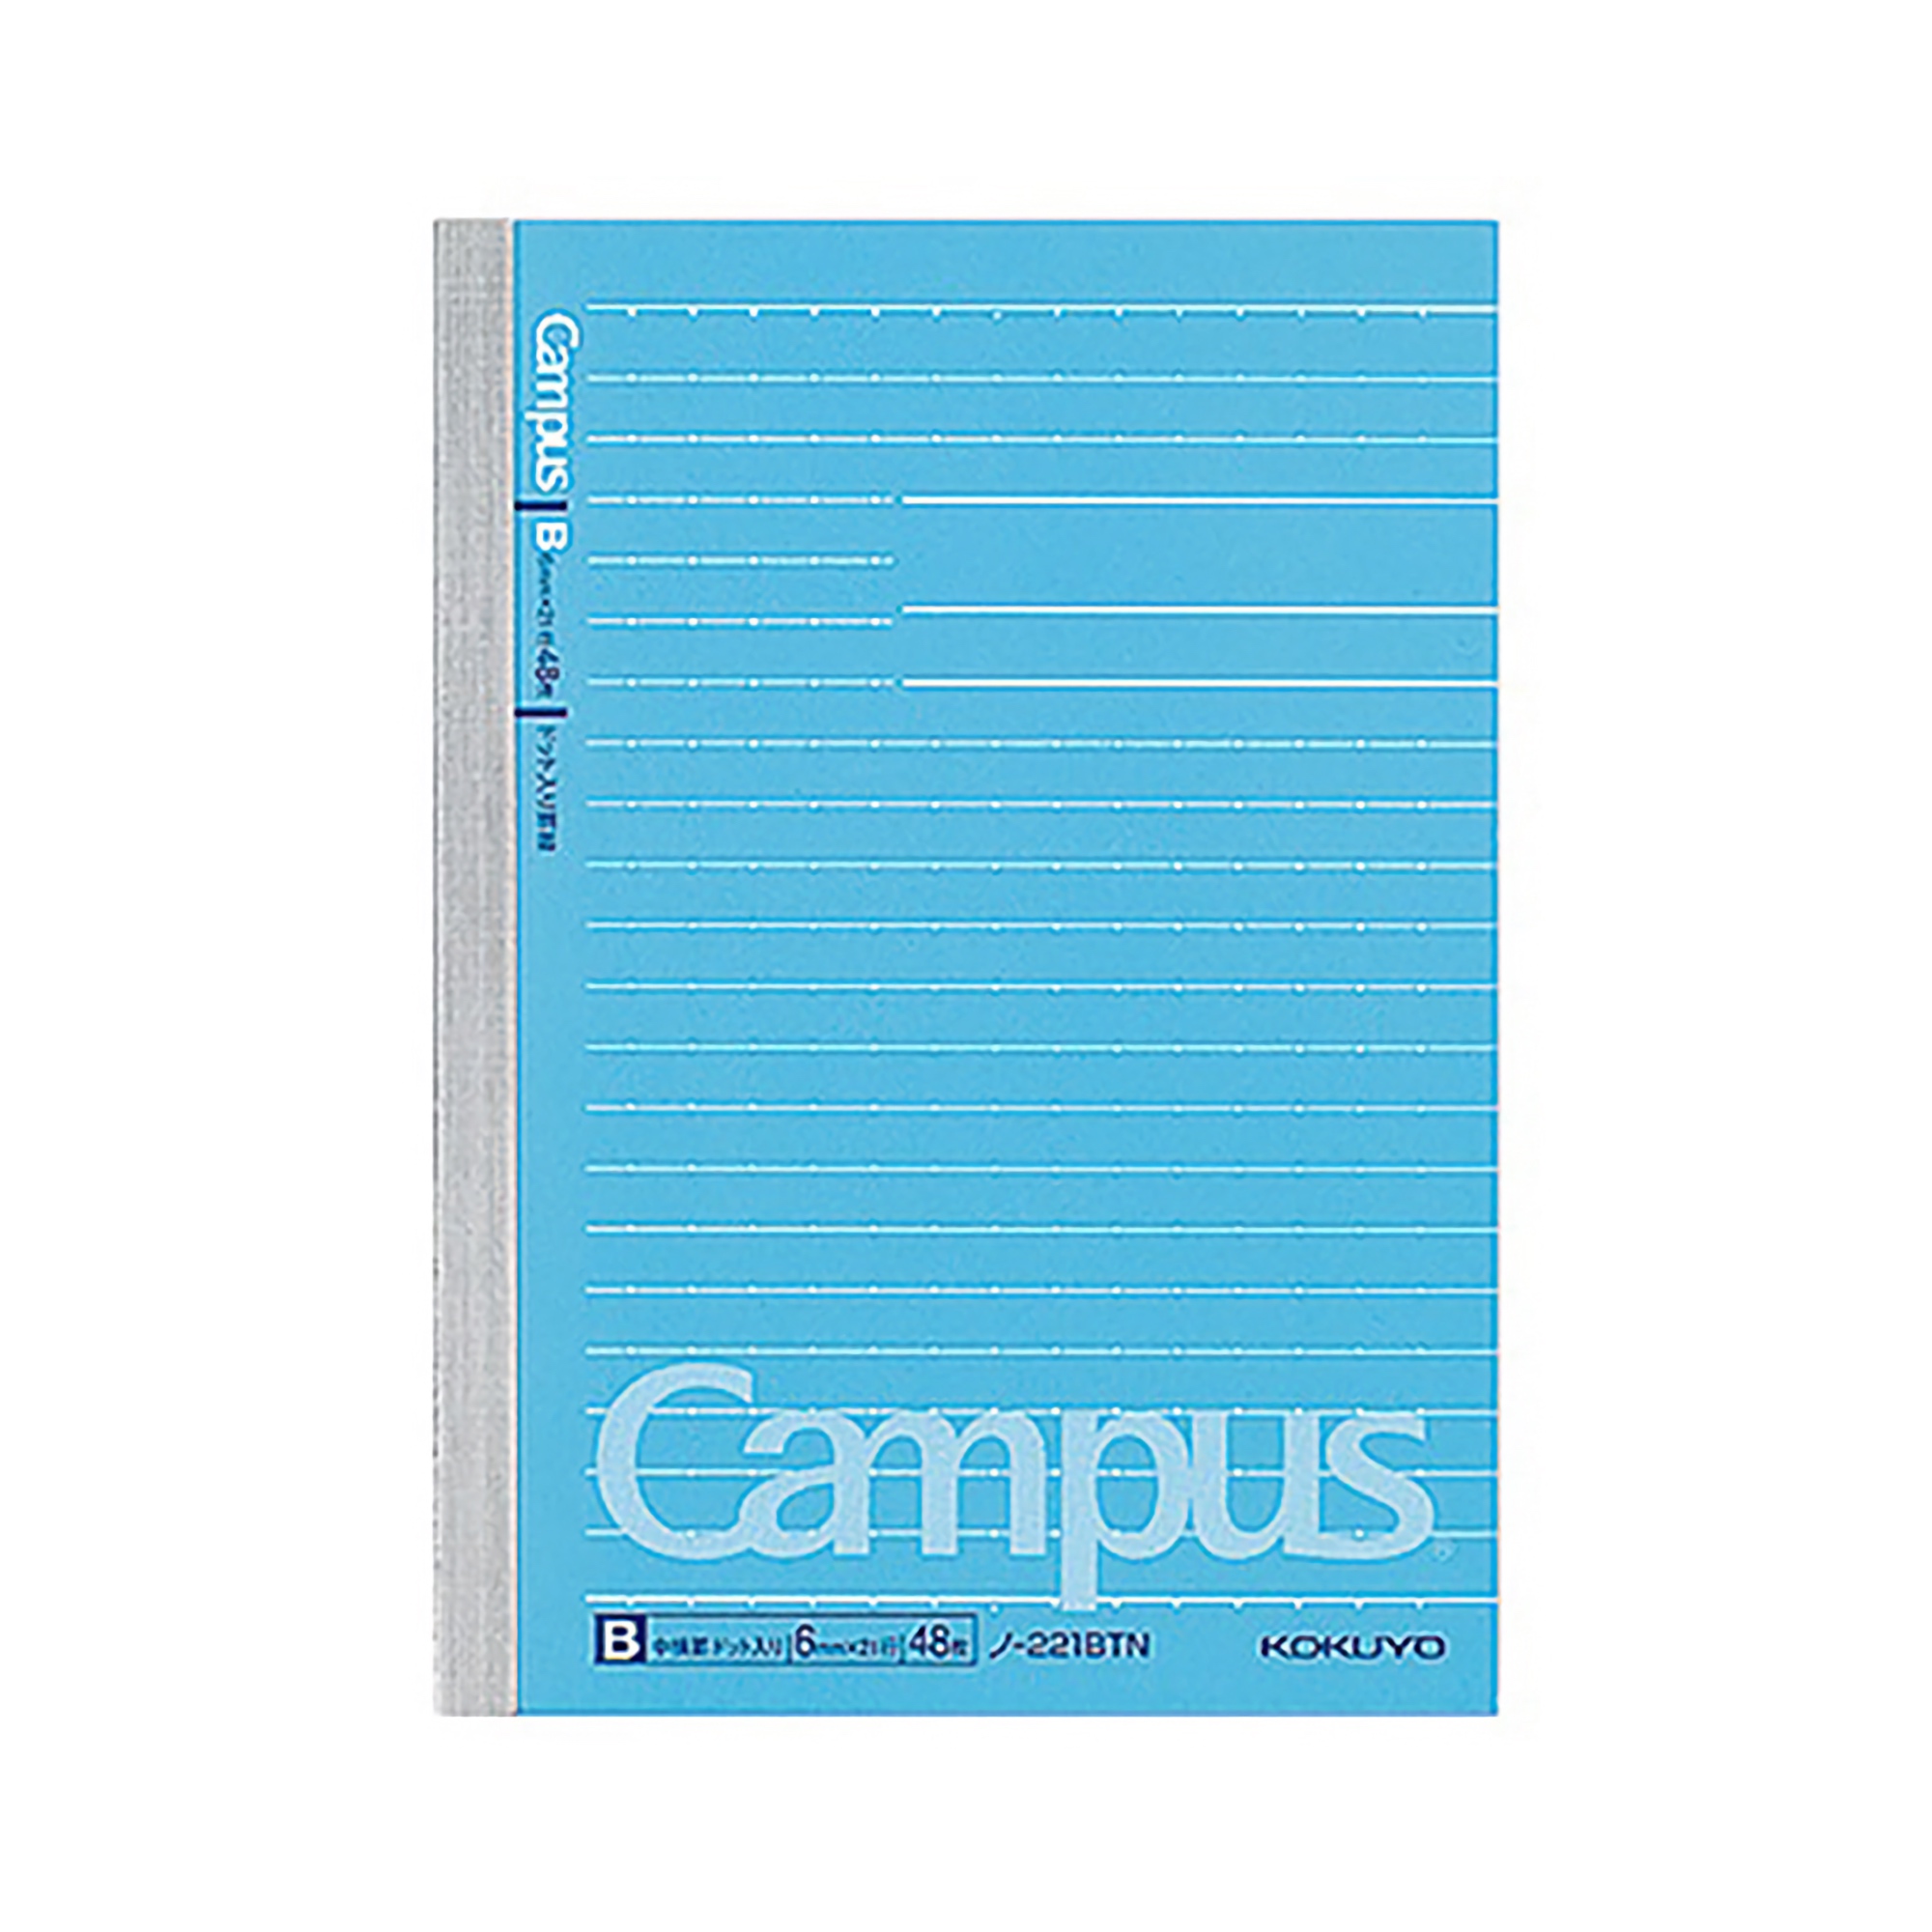 Kokuyo Campus Notebook A6 Dotted Lined 6 mm